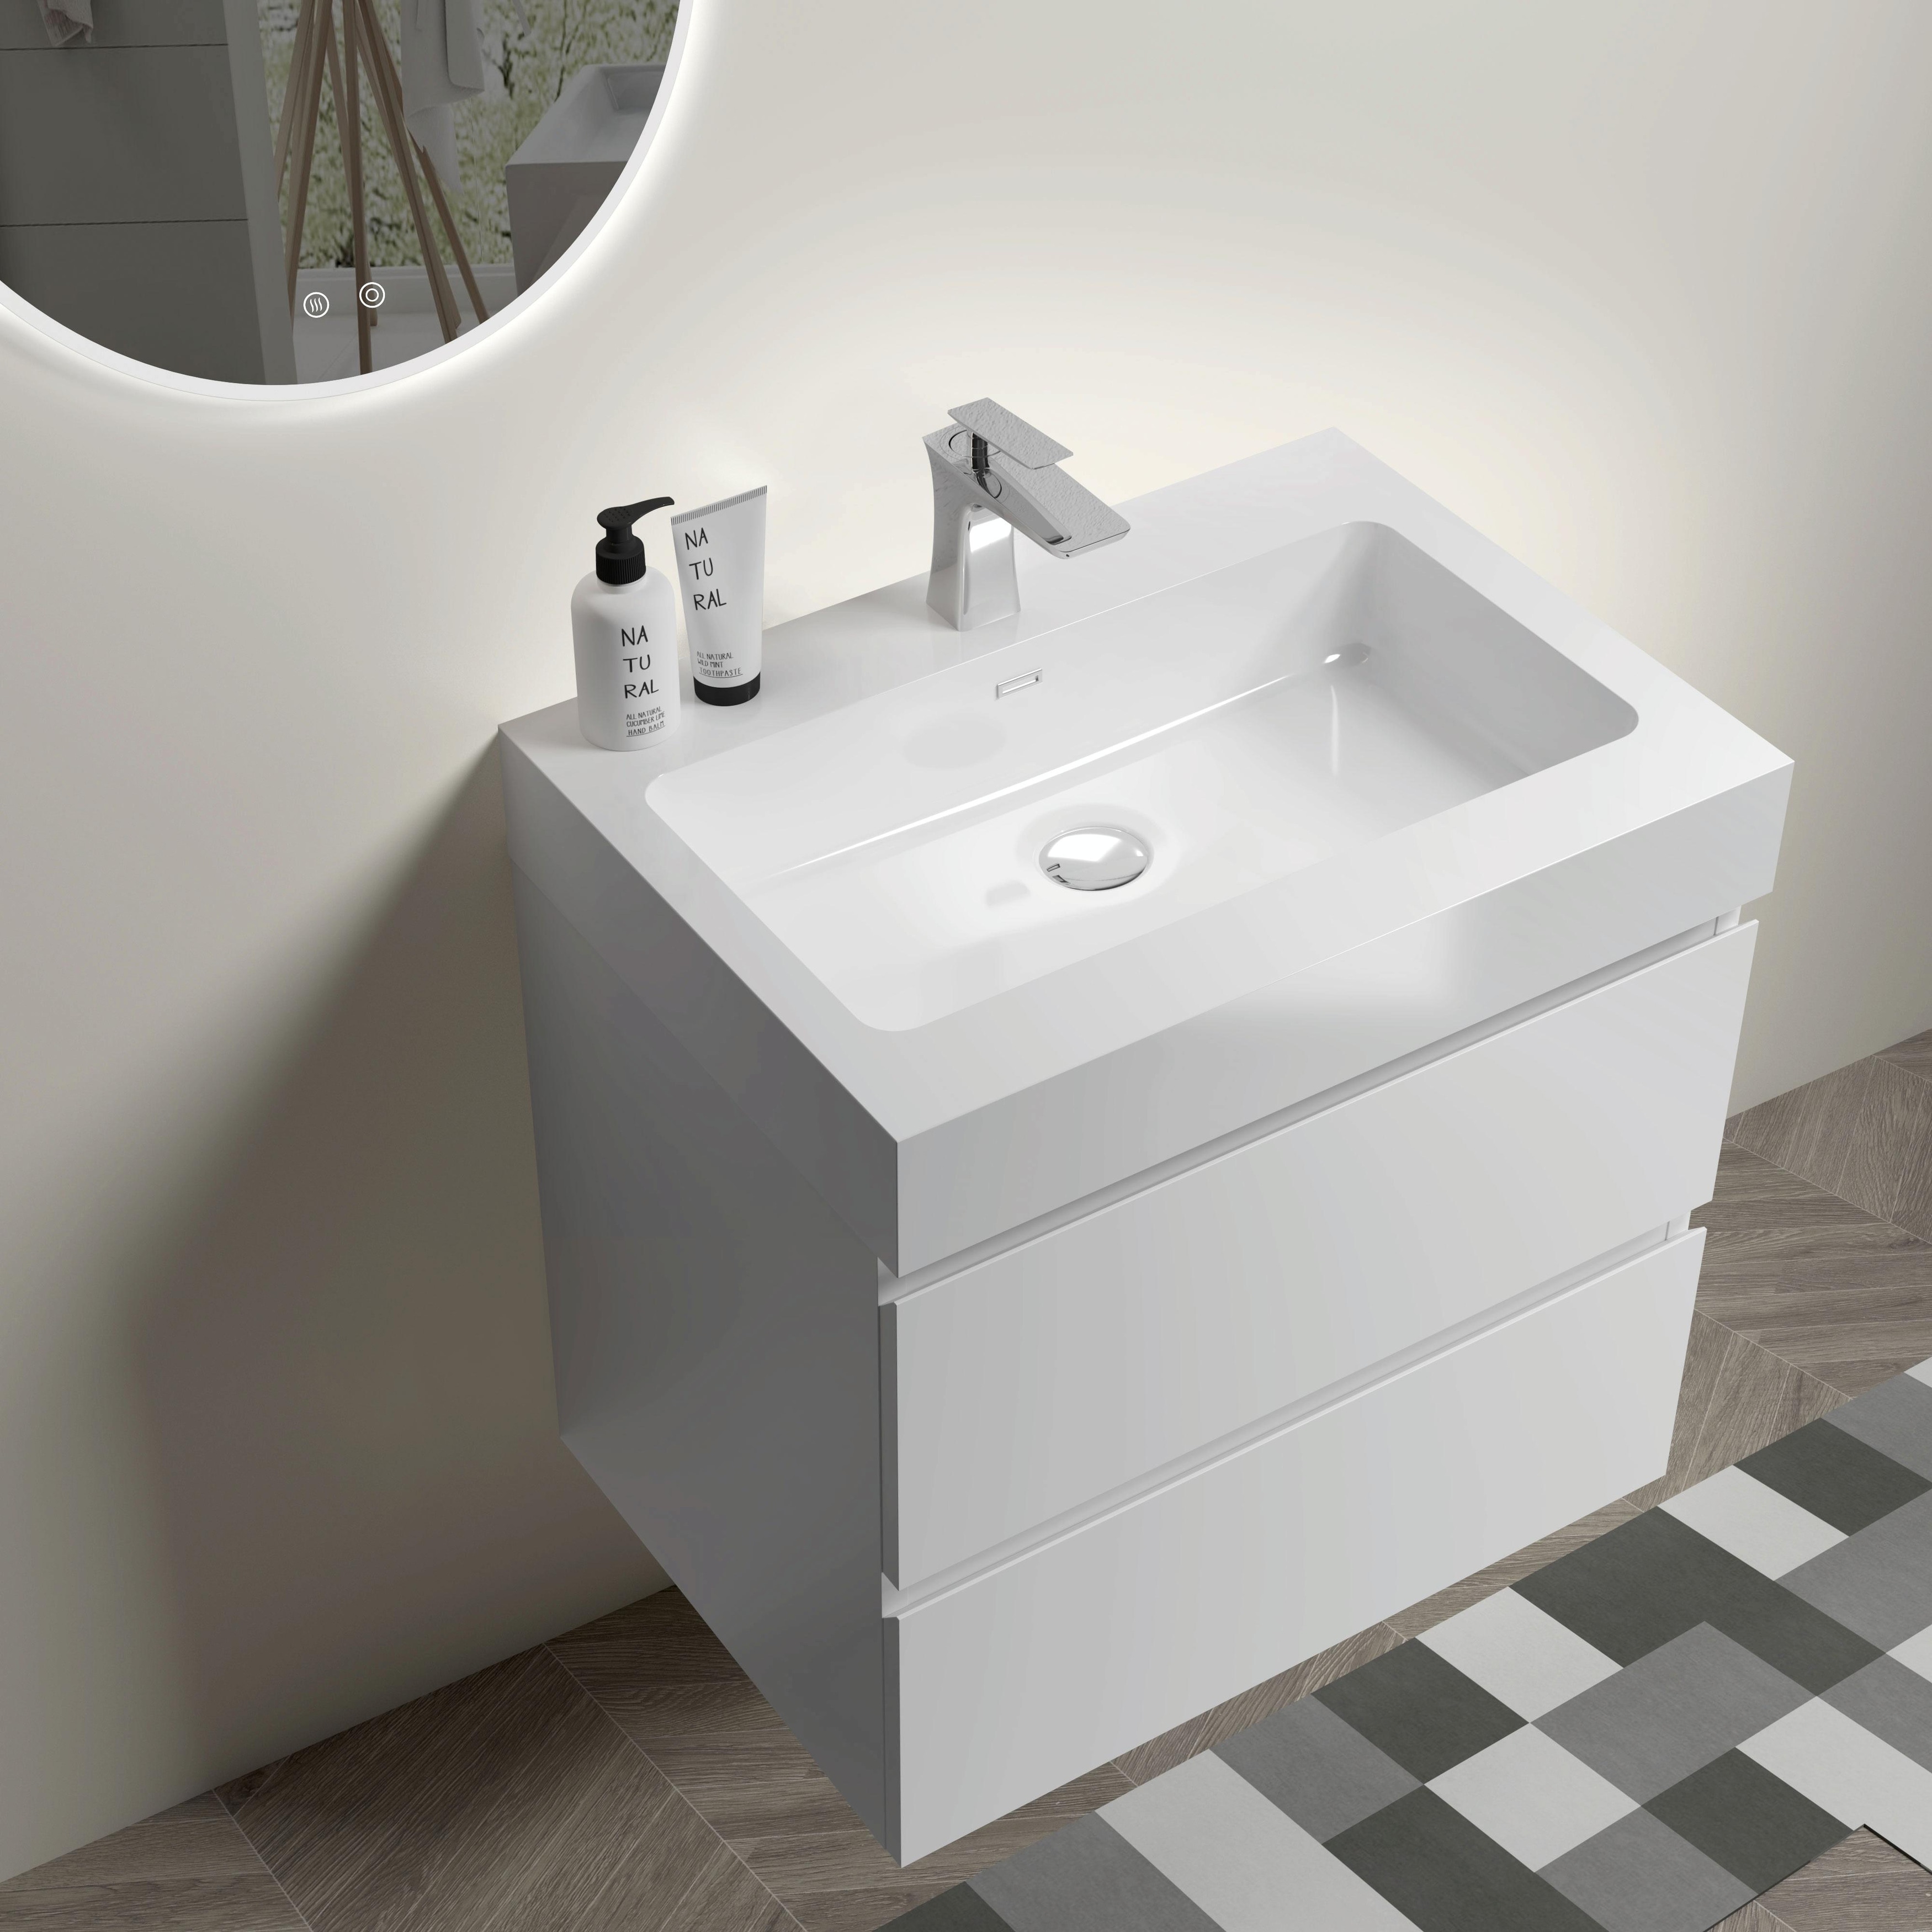 https://ak1.ostkcdn.com/images/products/is/images/direct/497e8052b608ad00541cb22c229b4f6722afc2e5/Modern-White-Floating-Bathroom-Vanity%3A-Wall-Mounted%2C-Ample-Storage%2C-One-Piece-Sink-Basin.jpg